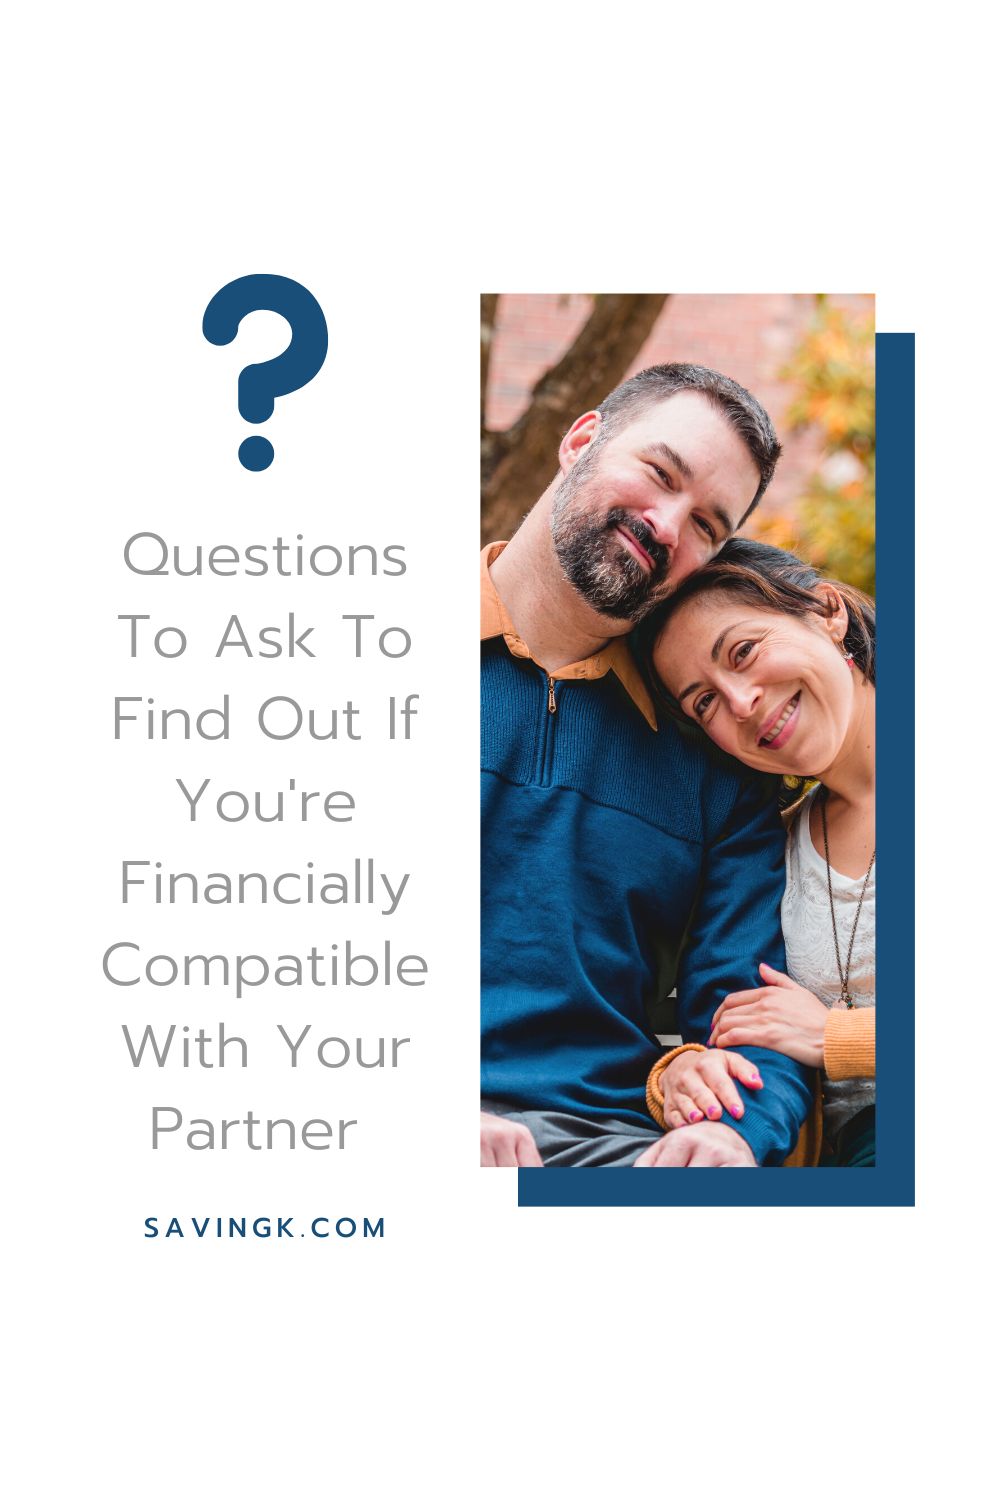 Questions To Ask To Find Out If You're Financially Compatible With Your Partner